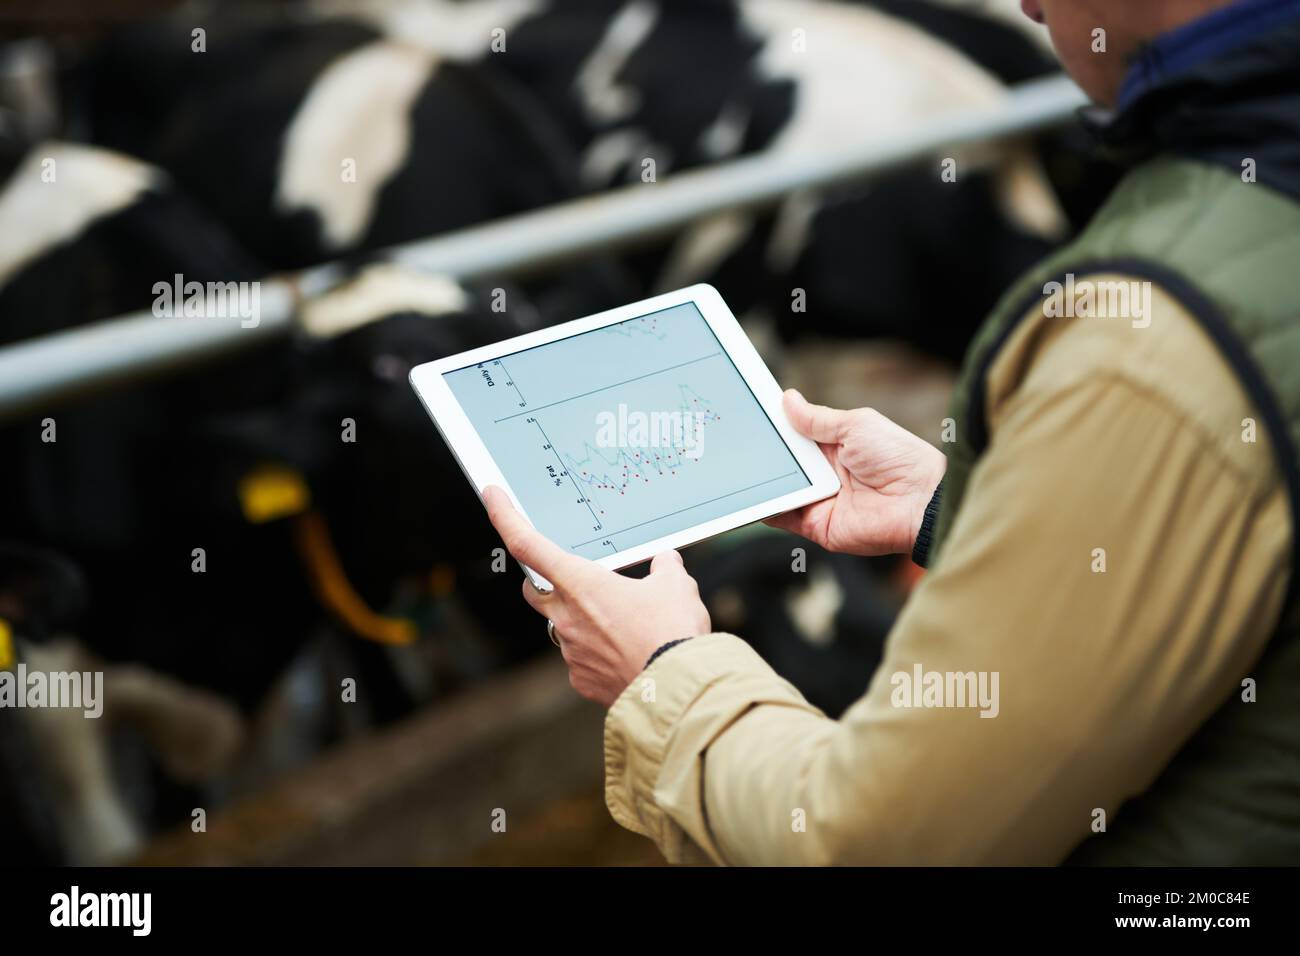 Digital tablet with graphic information on screen in hands of young male farmer analyzing data while standing in front of cowshed Stock Photo